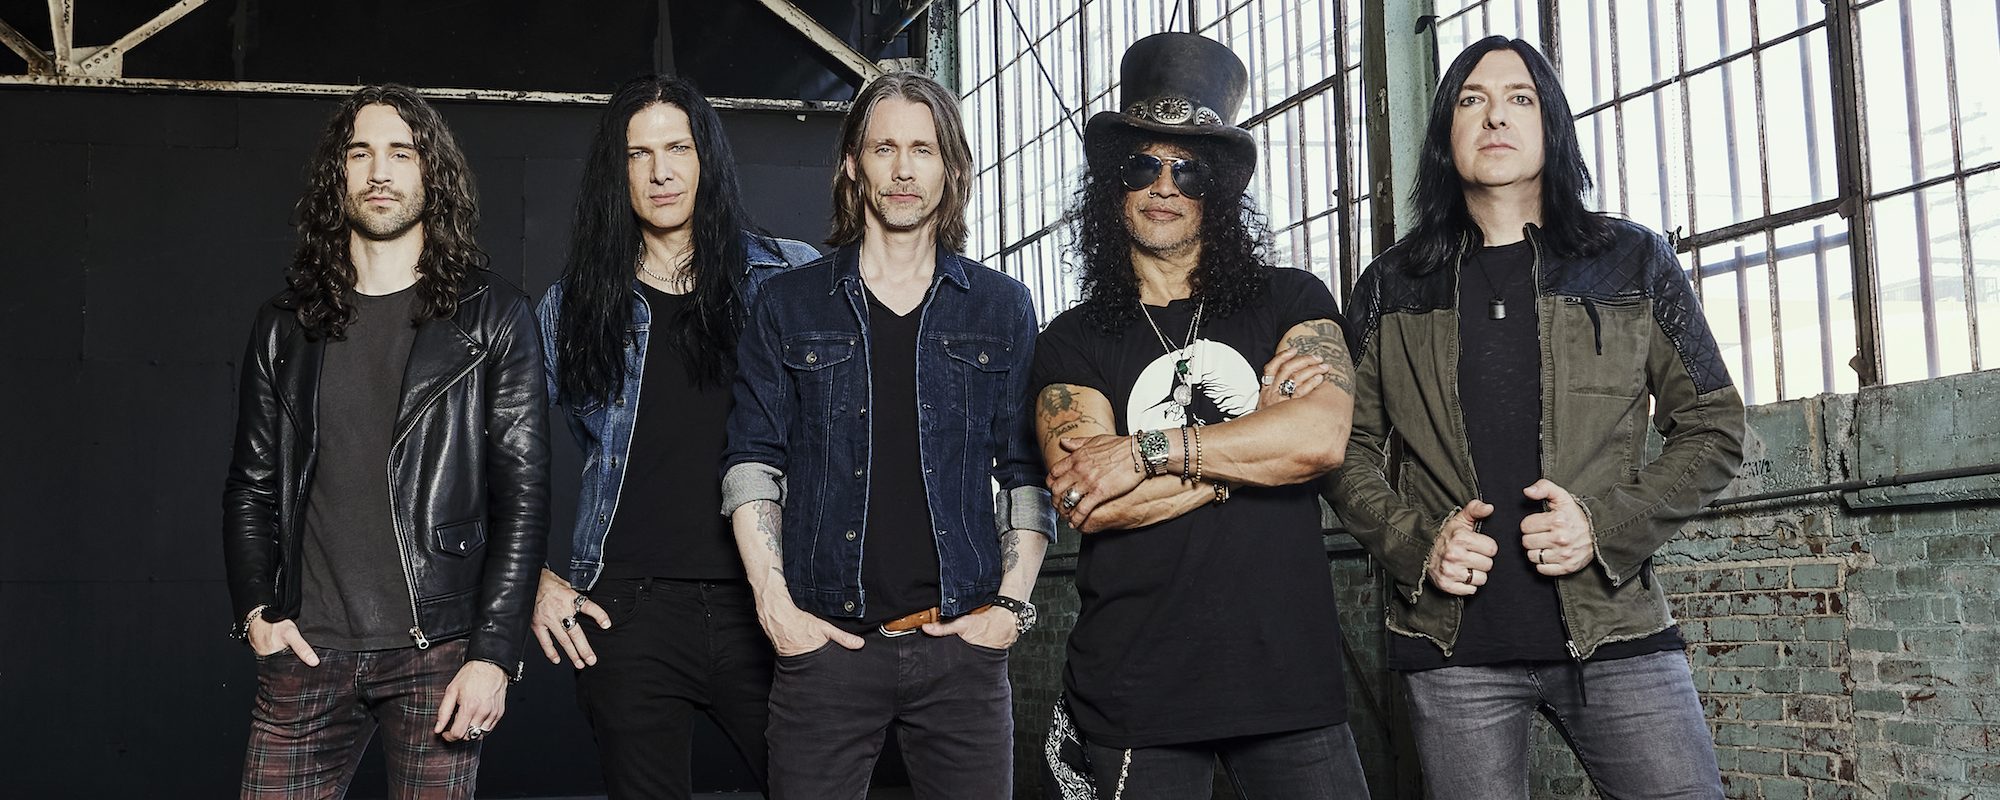 New Slash Solo Album in the Works, Set for Gibson Release